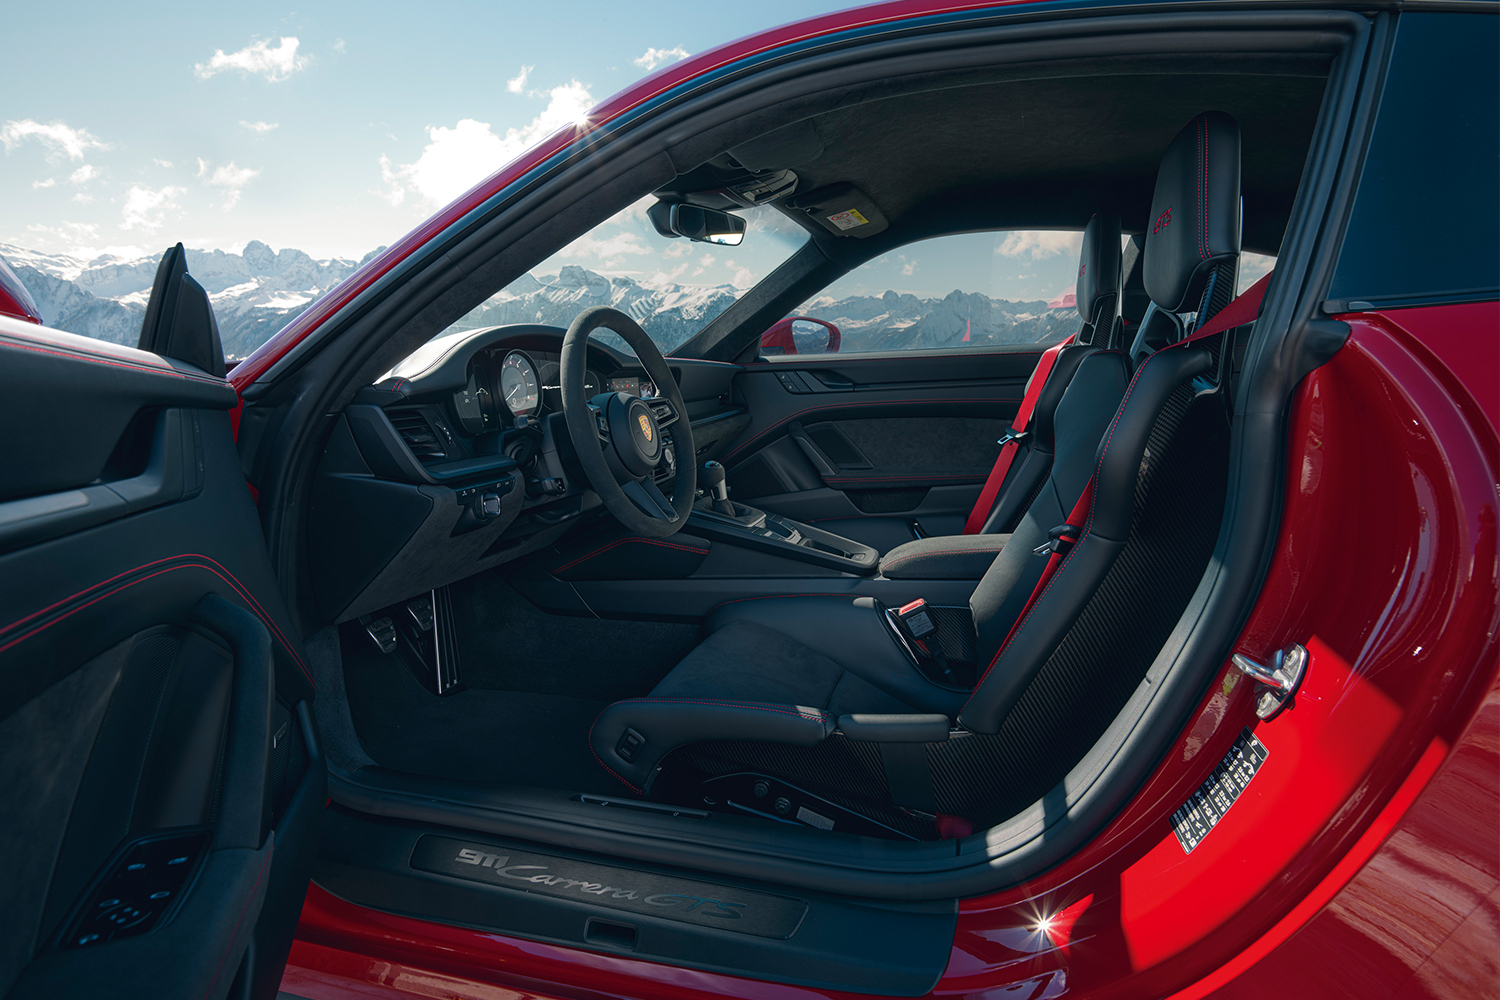 The two front seats of a 2022 Porsche 911 Carrera 4 GTS seen from the open driver's side door